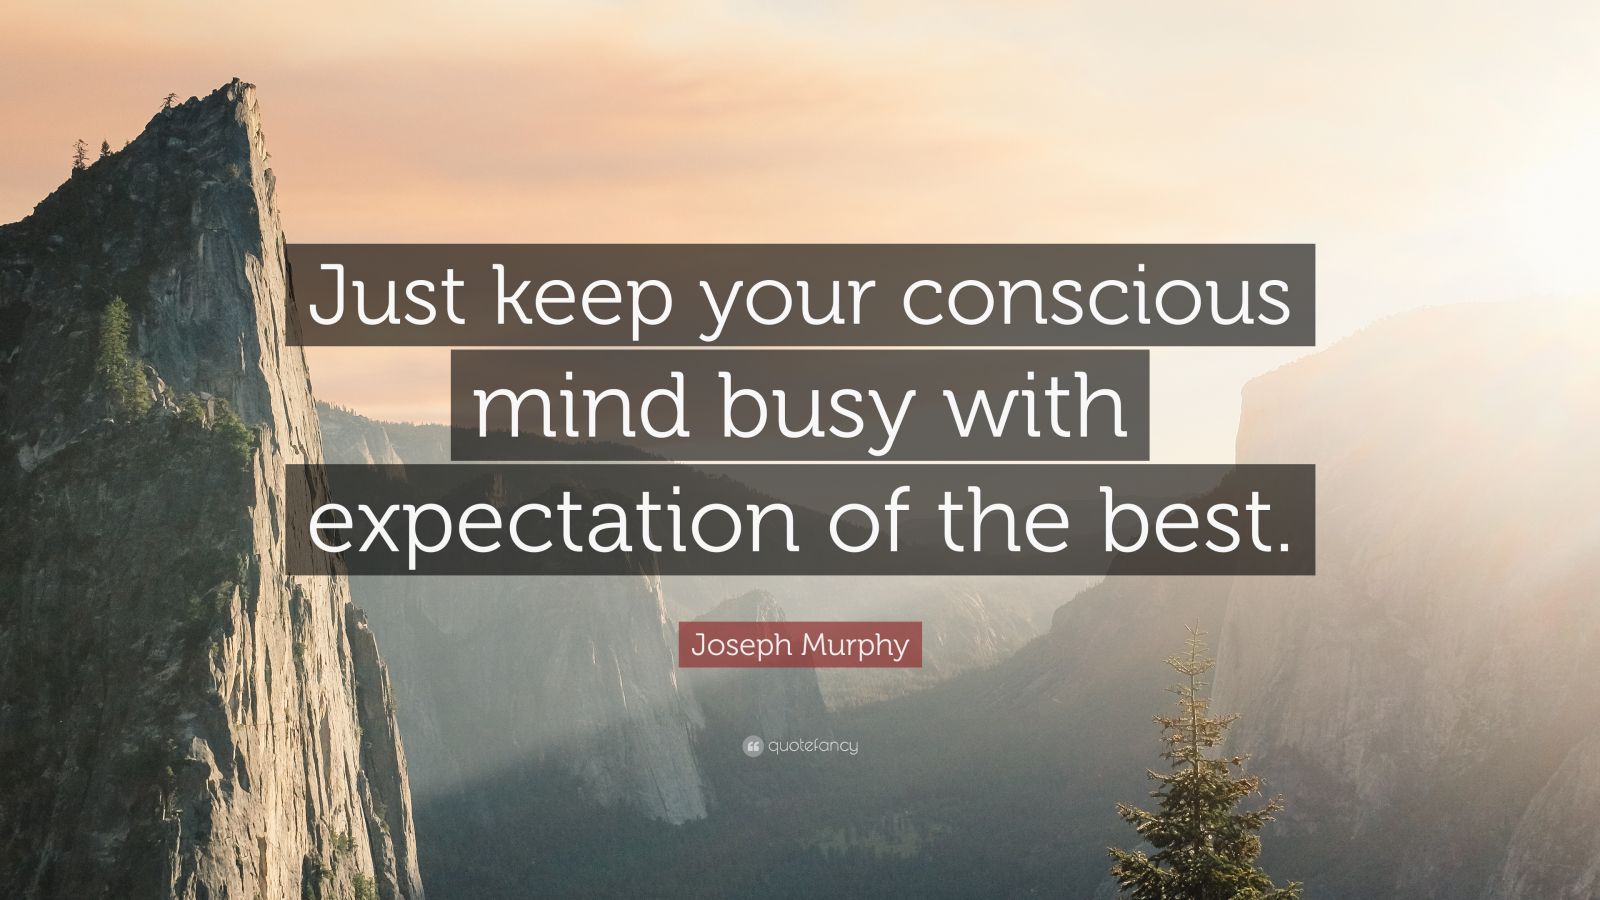 Joseph Murphy Quote: “Just keep your conscious mind busy with ...